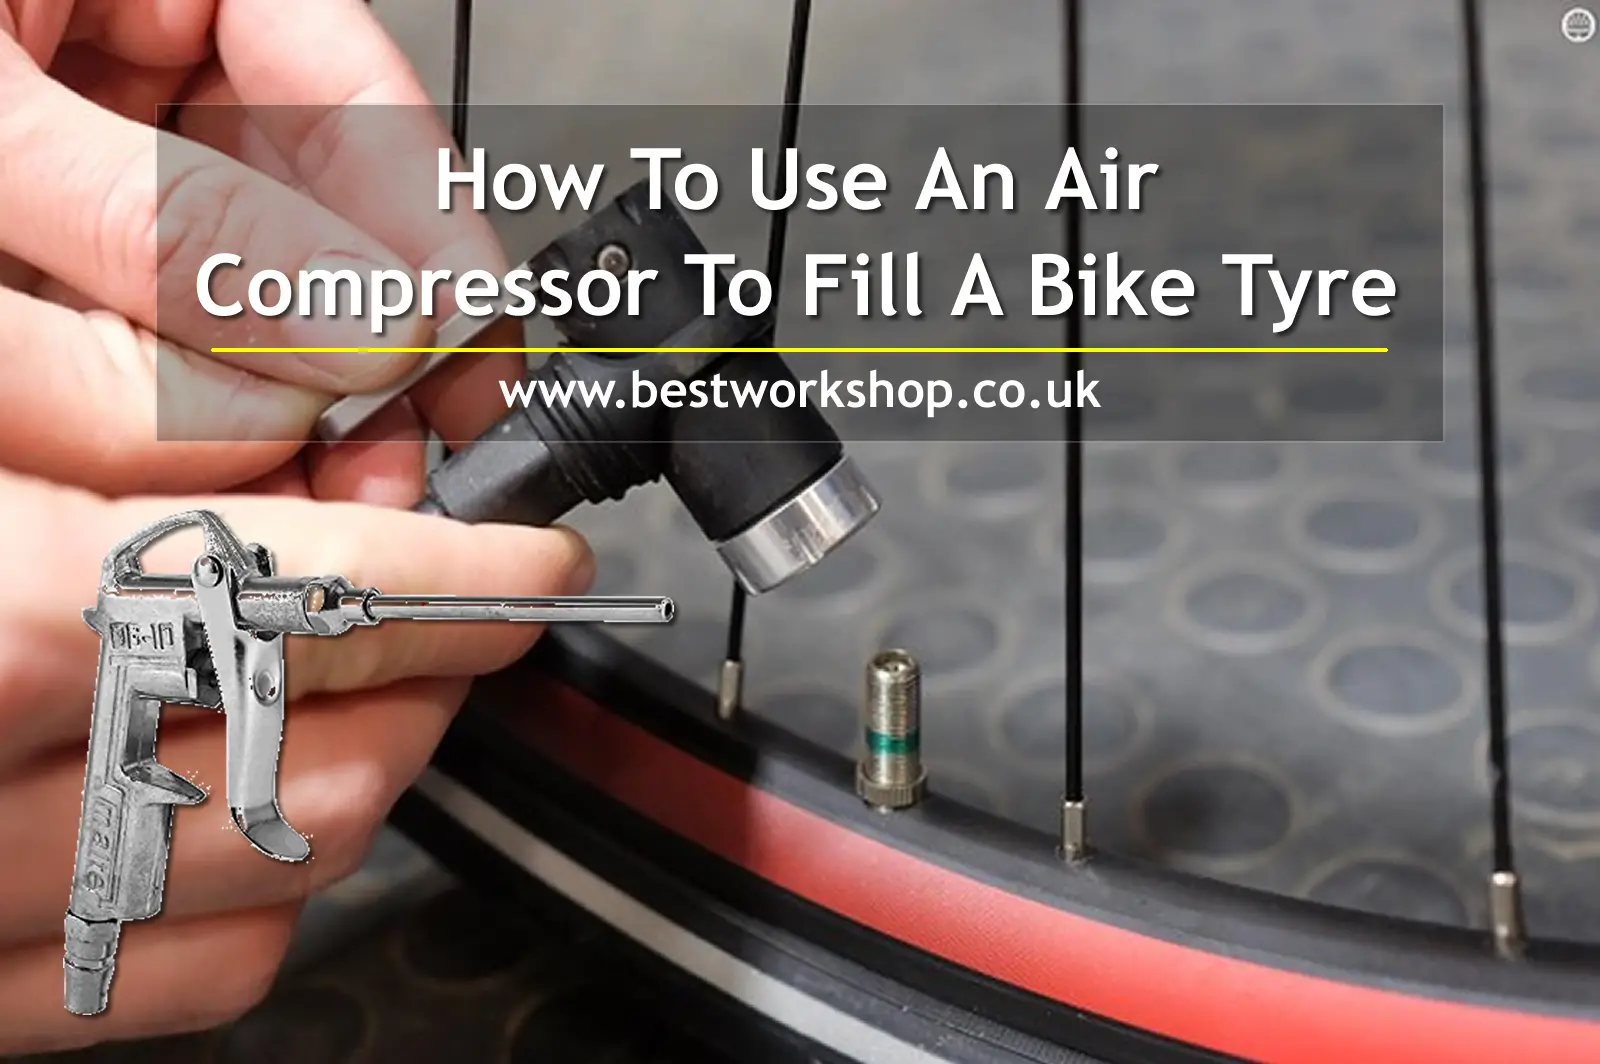 How To Use An Air Compressor To Fill A Bike Tyre